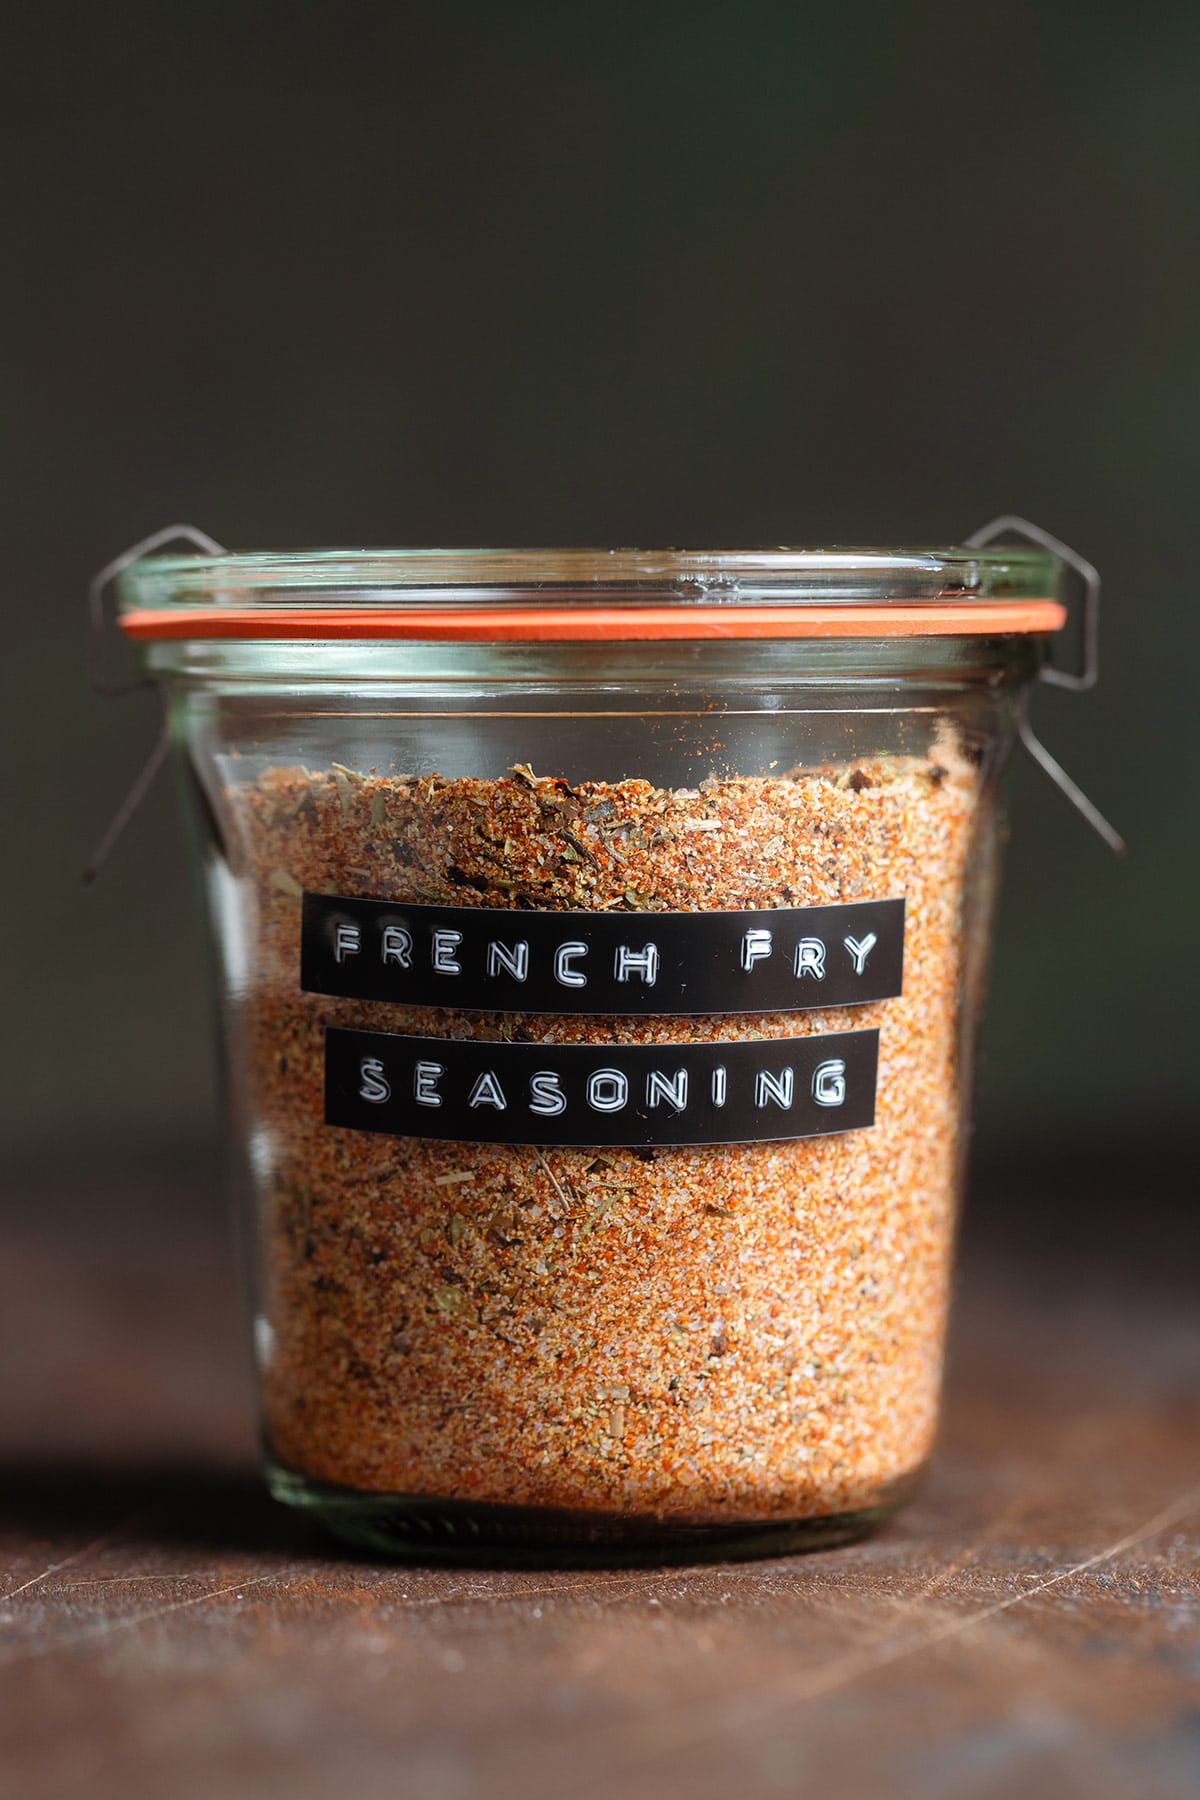 French fry seasoning in a small glass jar with a black label.